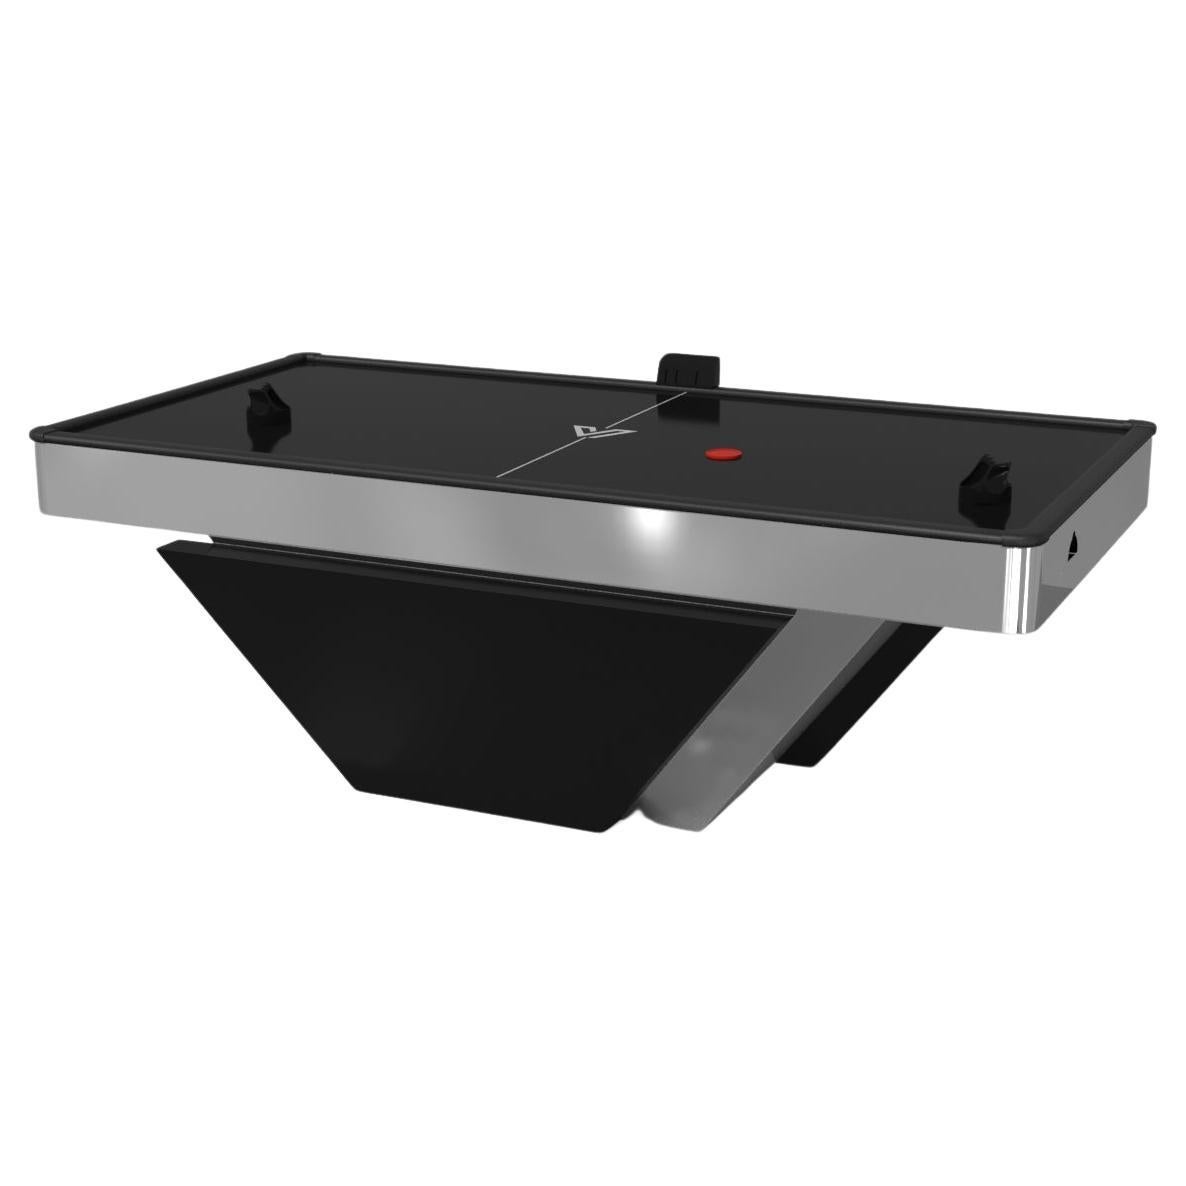 Elevate Customs Vogue Air Hockey Tables /Stainless Steel Metal in 7'-Made in USA For Sale